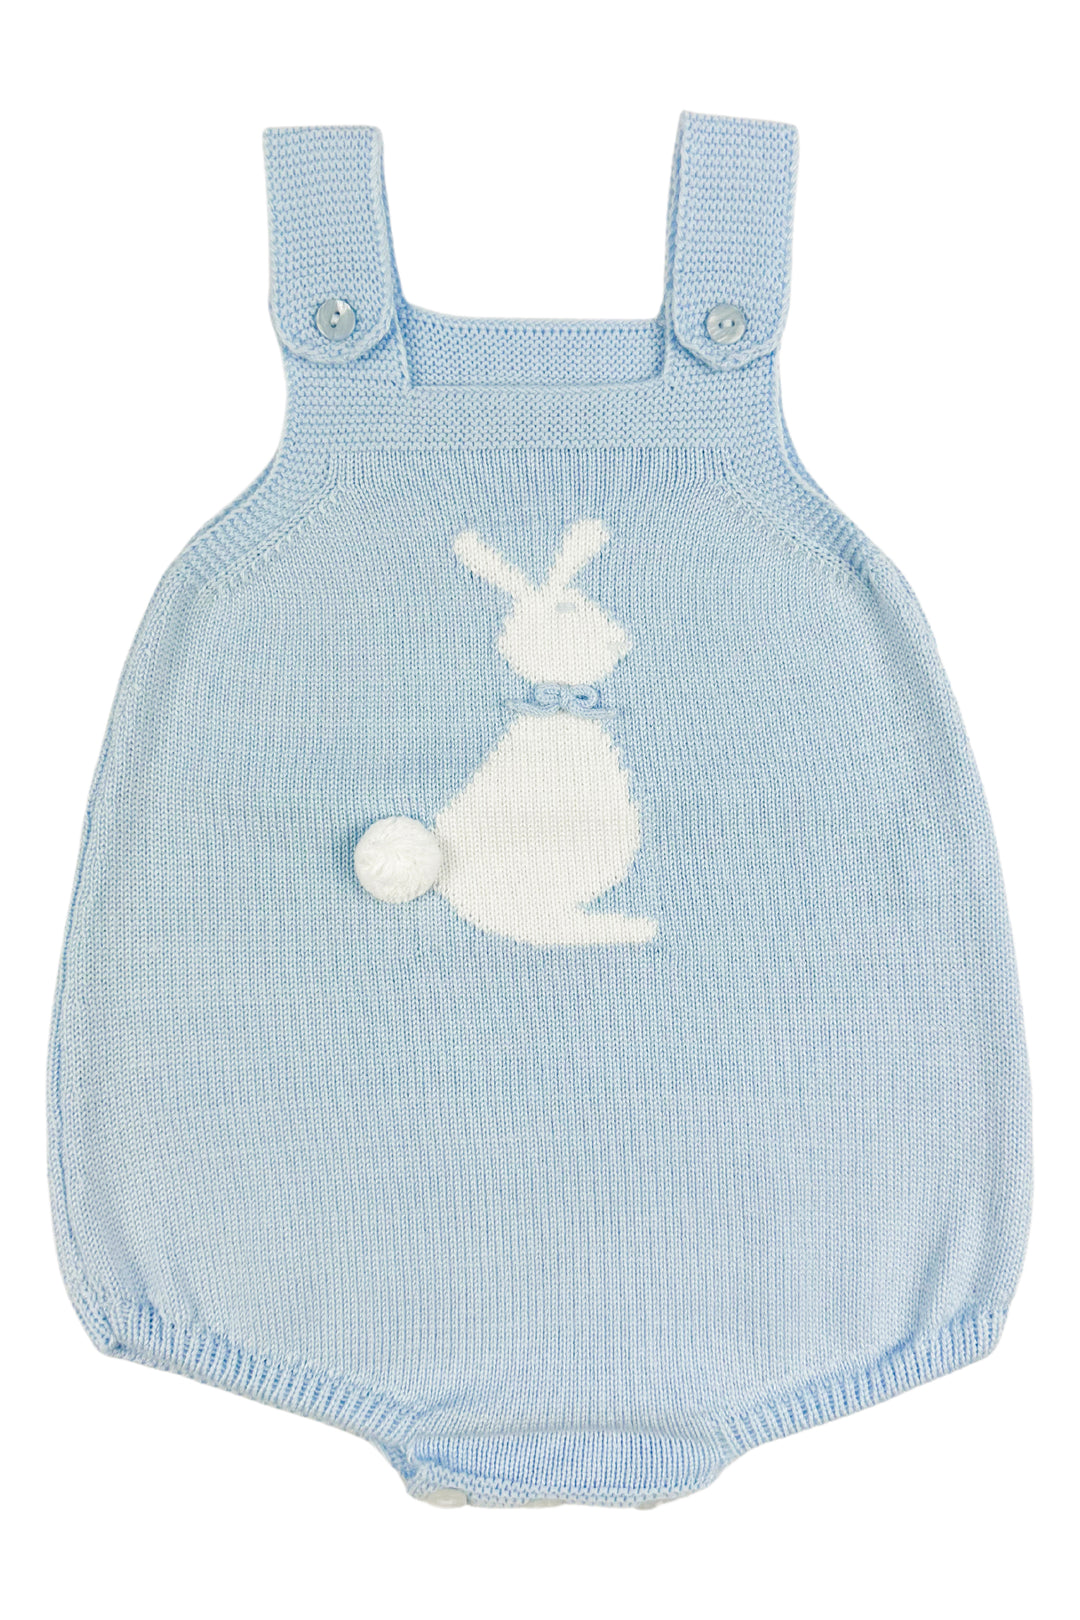 Granlei "Roux" Blue Knit Bunny Dungaree Romper | Millie and John